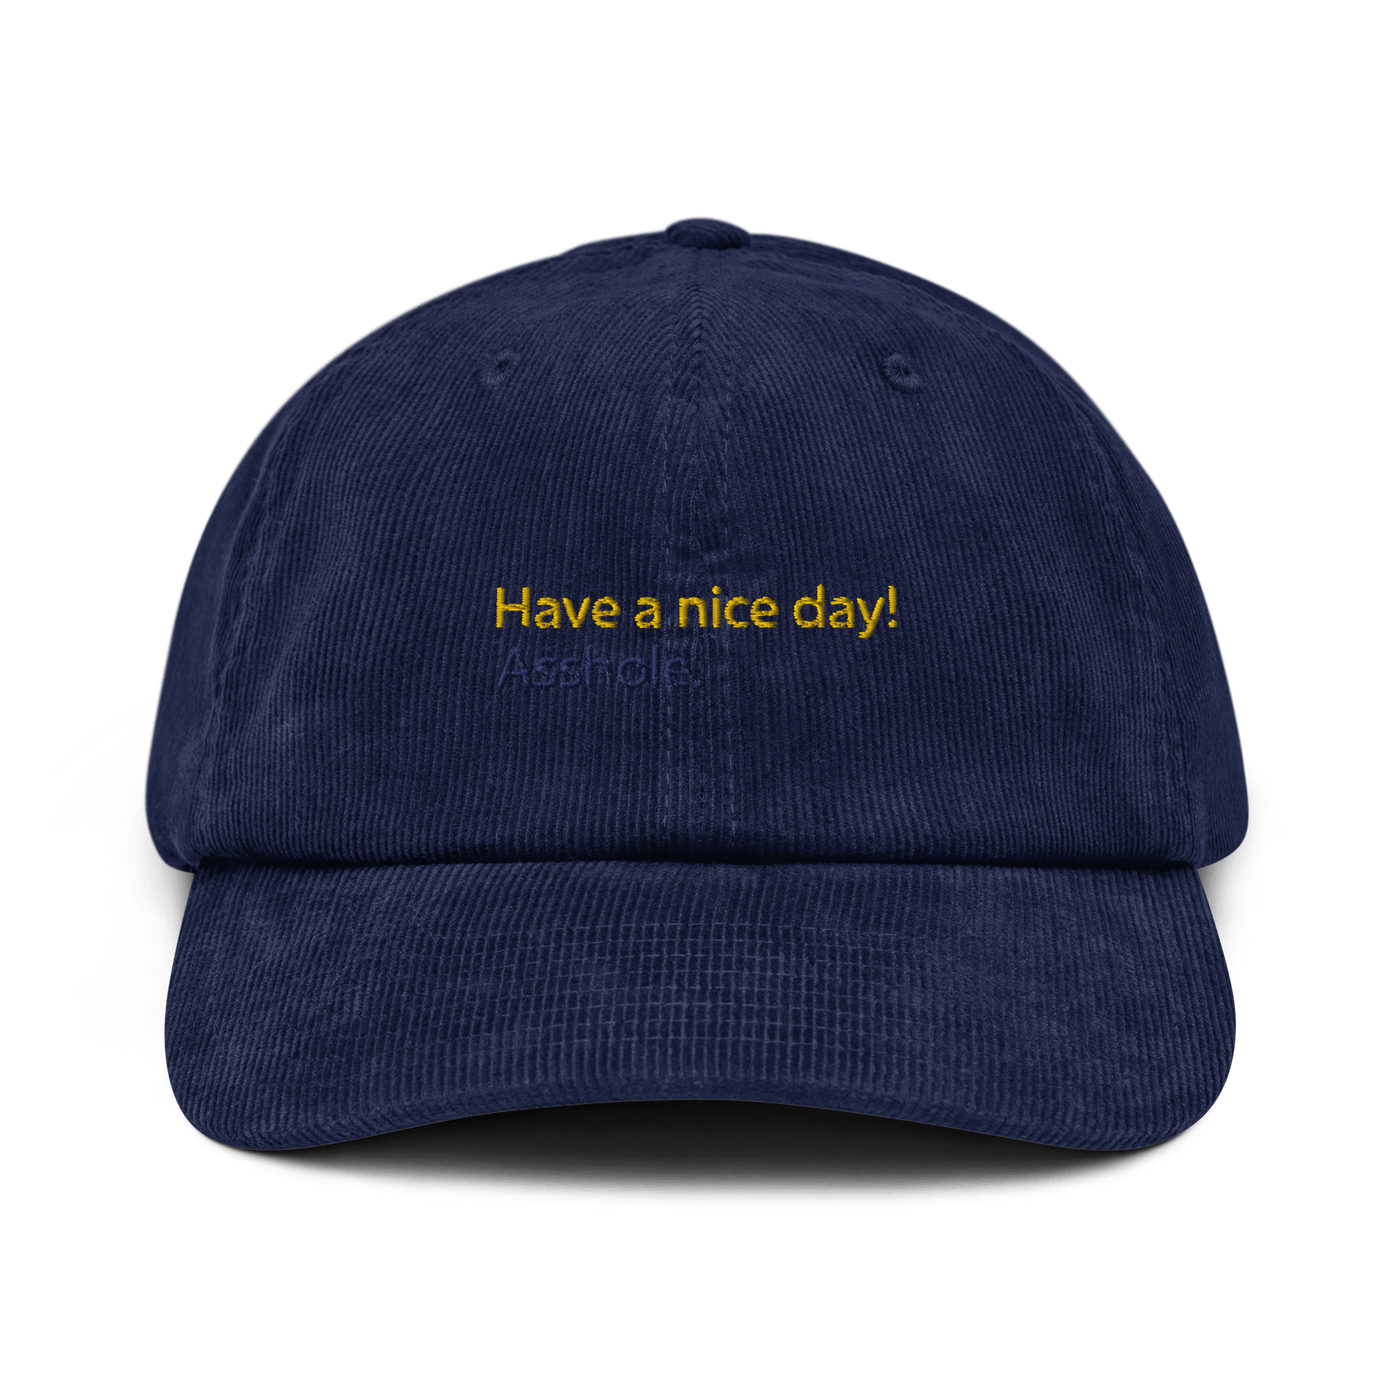 Have a nice day! (asshole) Corduroy hat - Oxford Navy - - Just Another Cap Store